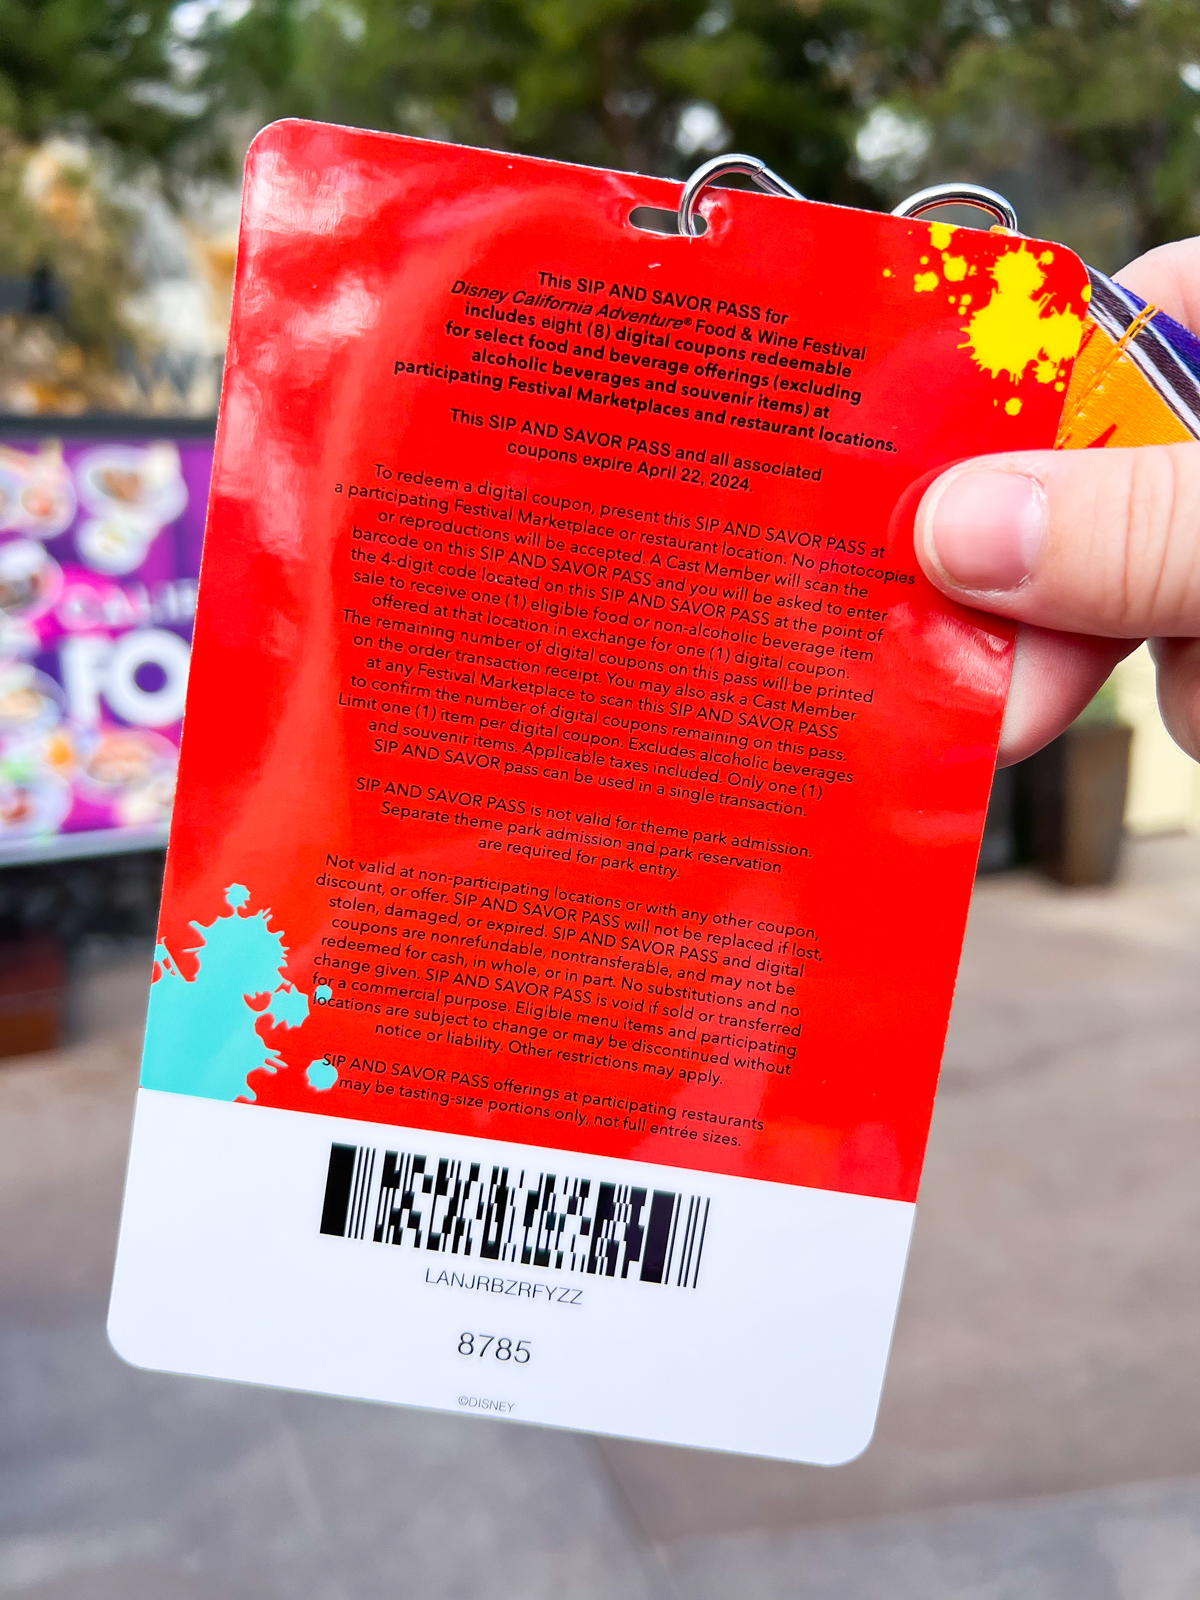 digital bar code on the back of food and wine festival sip and savor pass